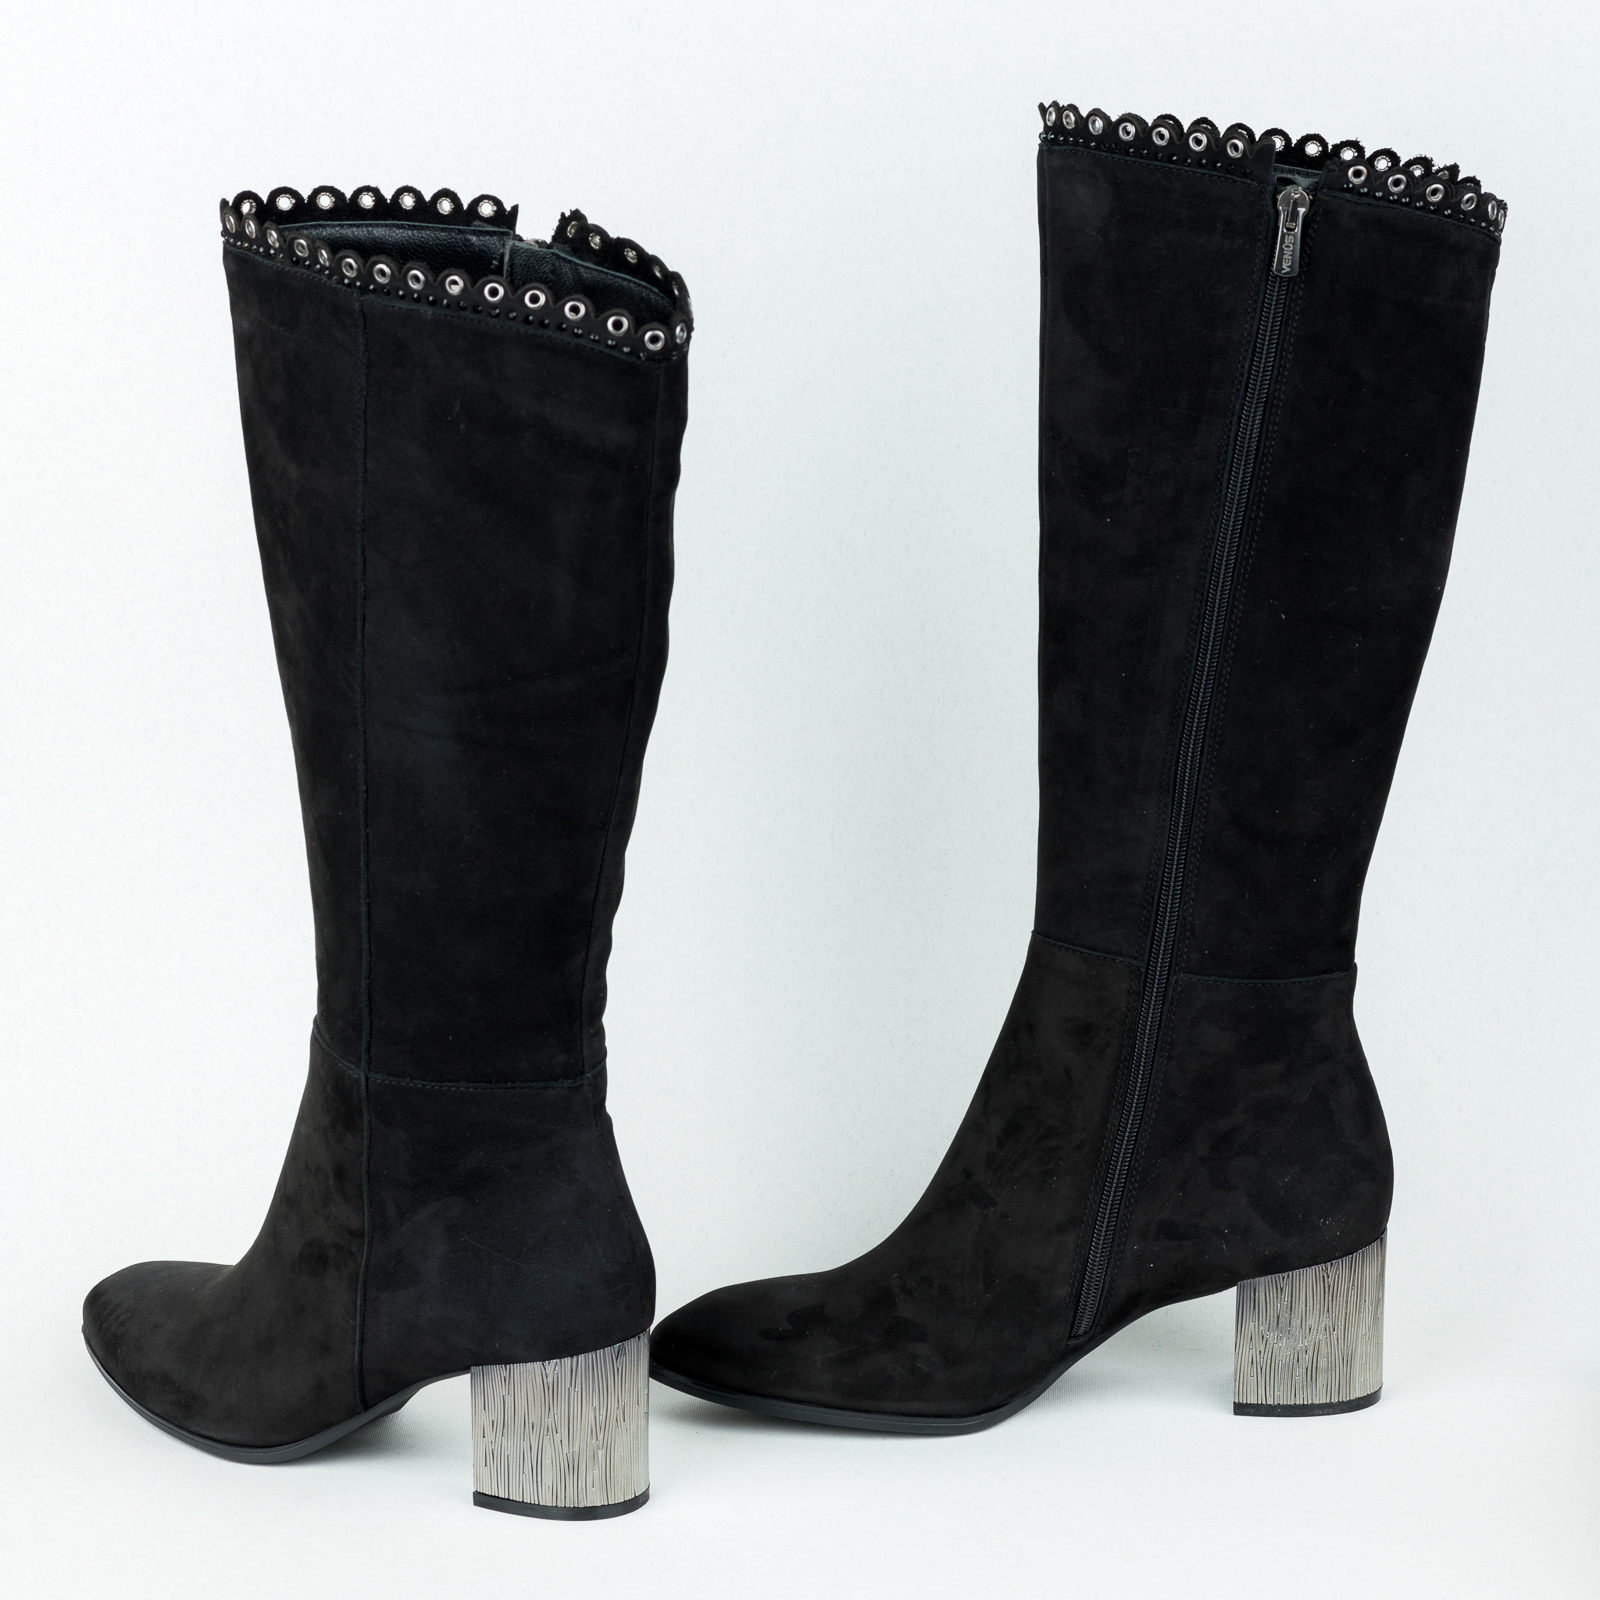 Leather boots B634 - BLACK